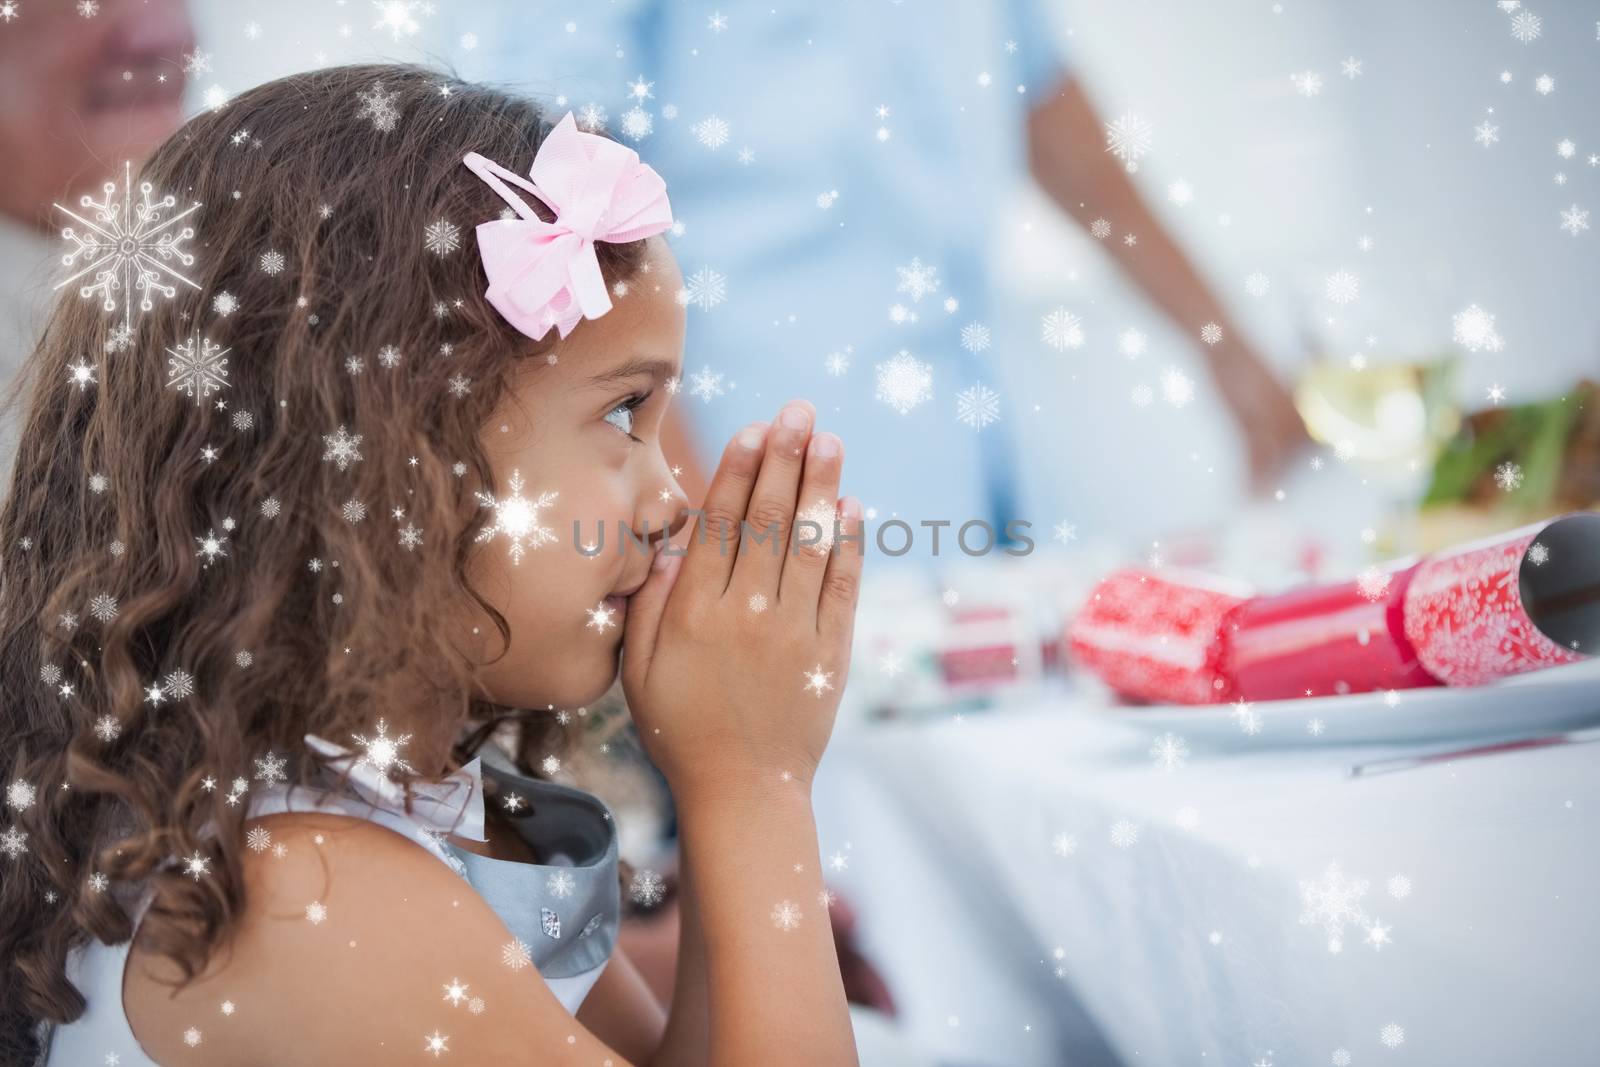 Composite image of Little girl sitting praying at table against snow falling